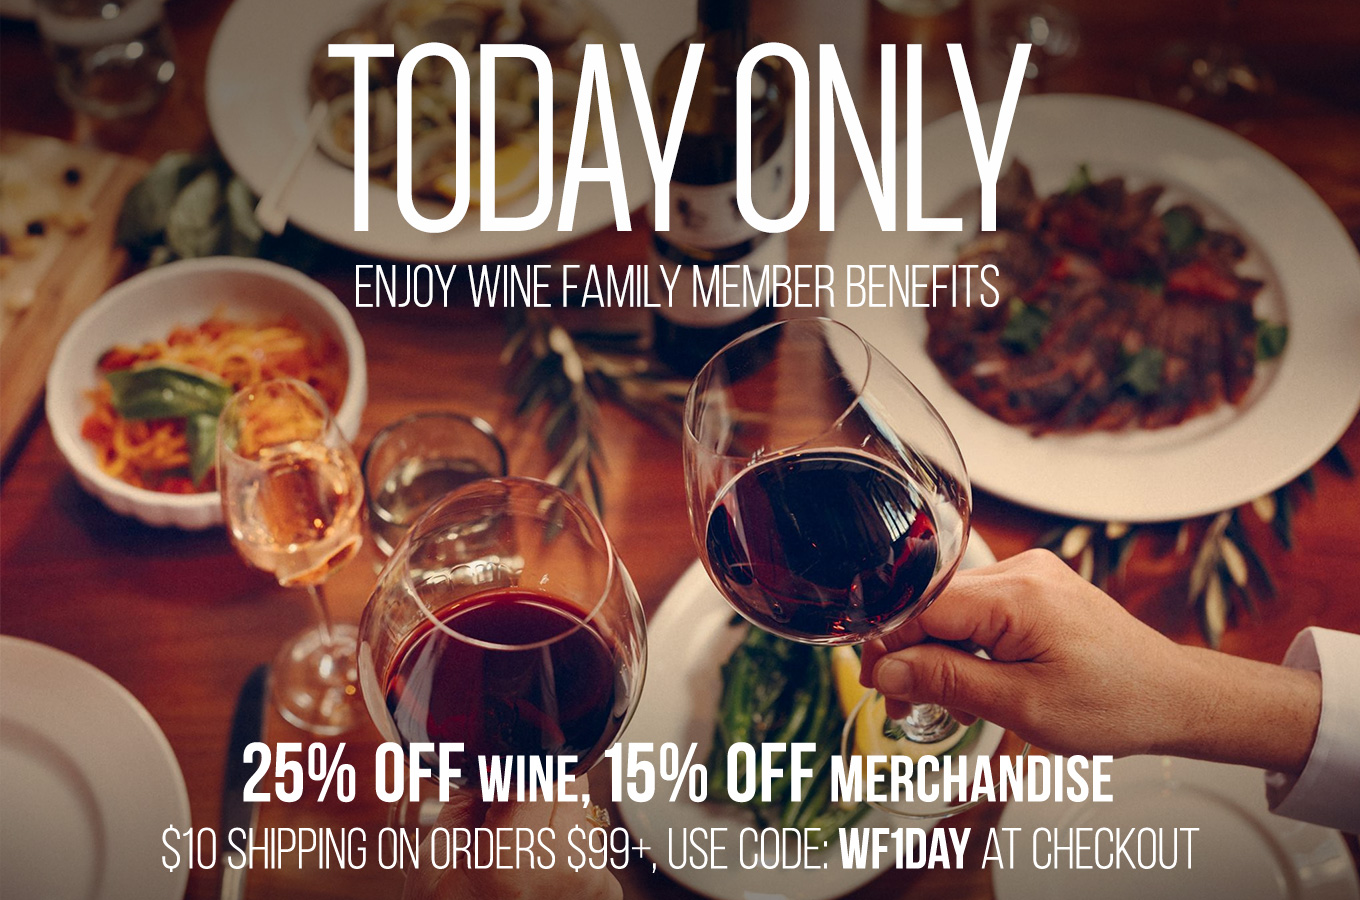 TODAY ONLY, Enjoy Wine Family Member Benefits